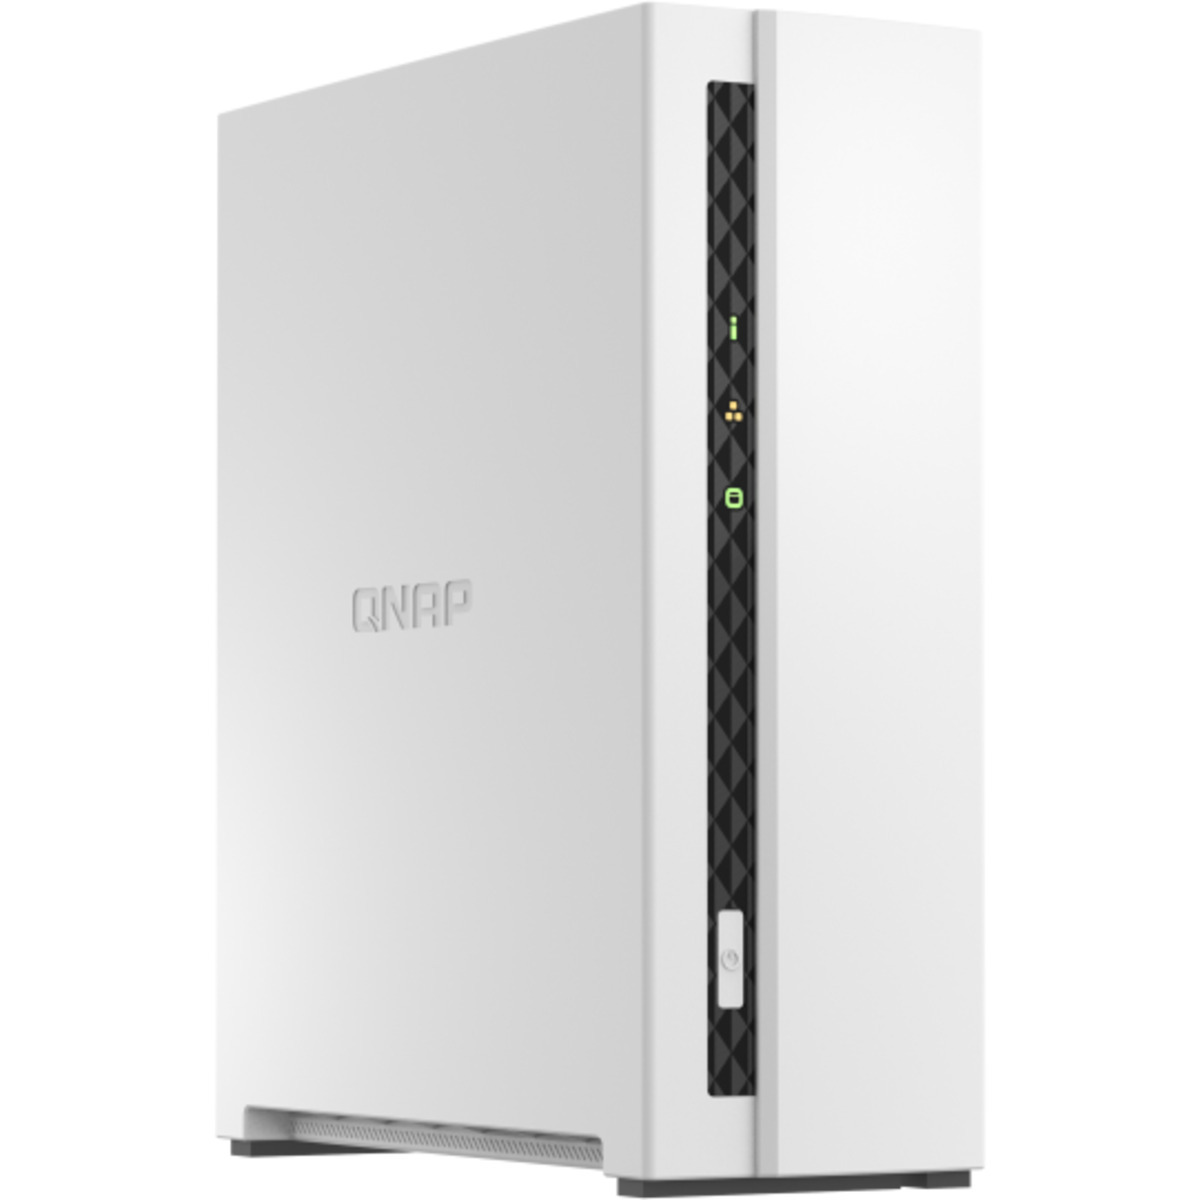 QNAP TS-133 1tb 1-Bay Desktop Personal / Basic Home / Small Office NAS - Network Attached Storage Device 1x1tb Crucial MX500 CT1000MX500SSD1 2.5 560/510MB/s SATA 6Gb/s SSD CONSUMER Class Drives Installed - Burn-In Tested TS-133